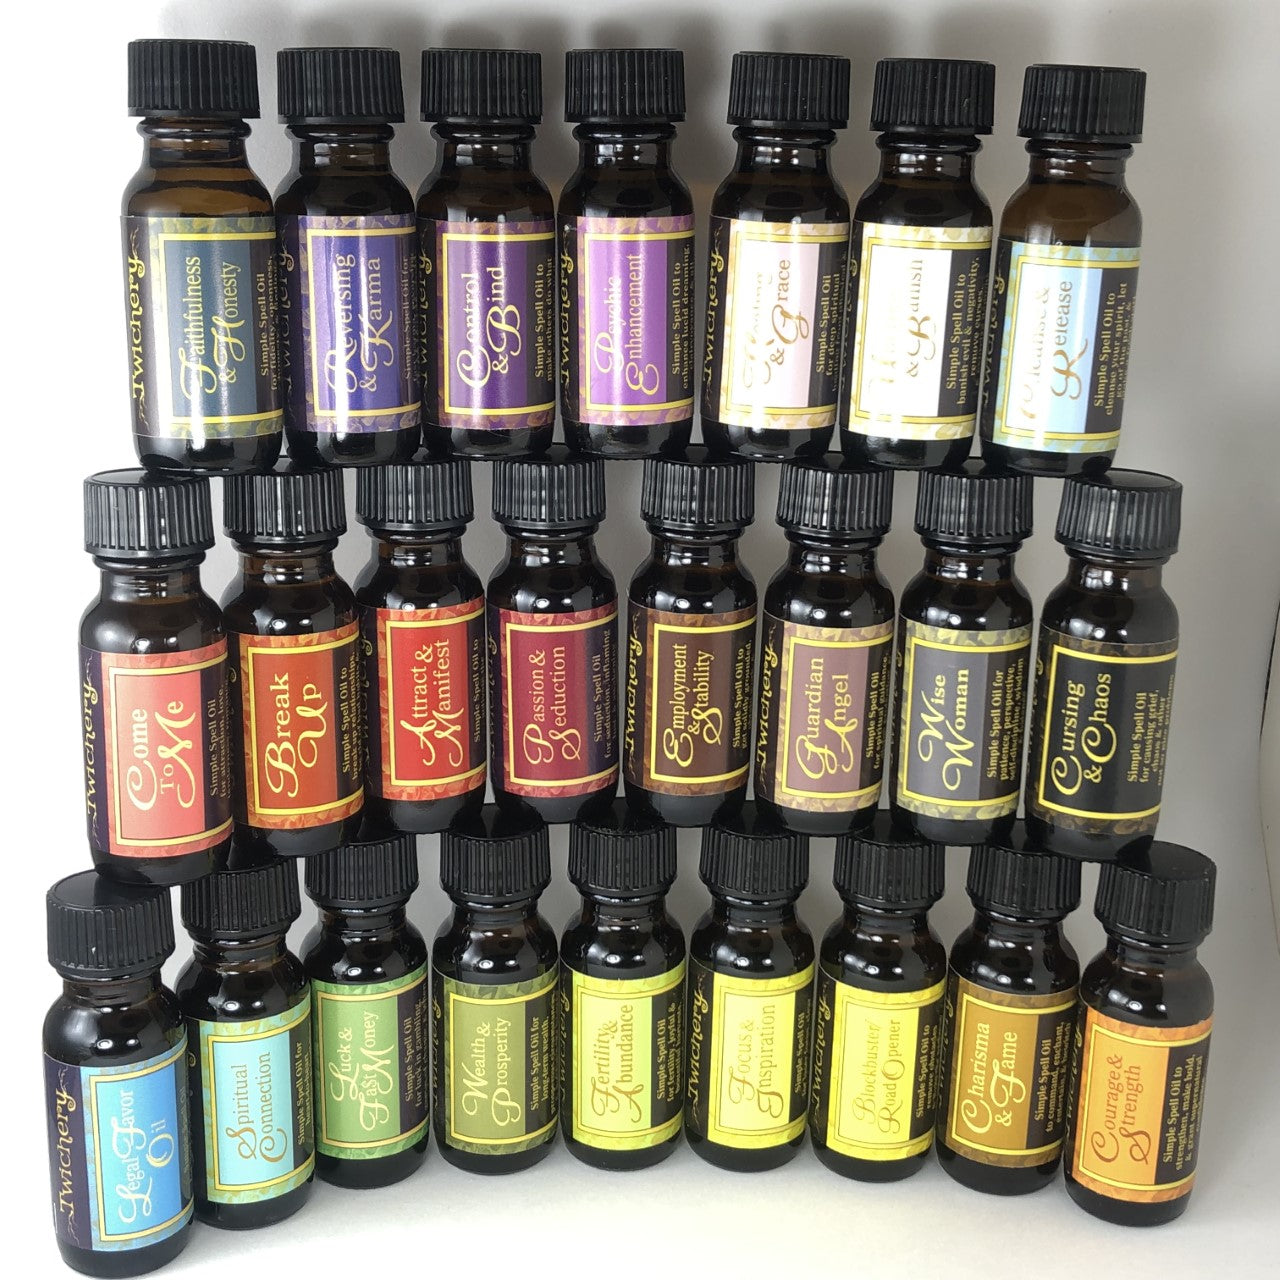 Twichery Quikspell Oils for Fertility and Bountiful Harvests, Hoodoo, Voodoo, Wicca, Pagan